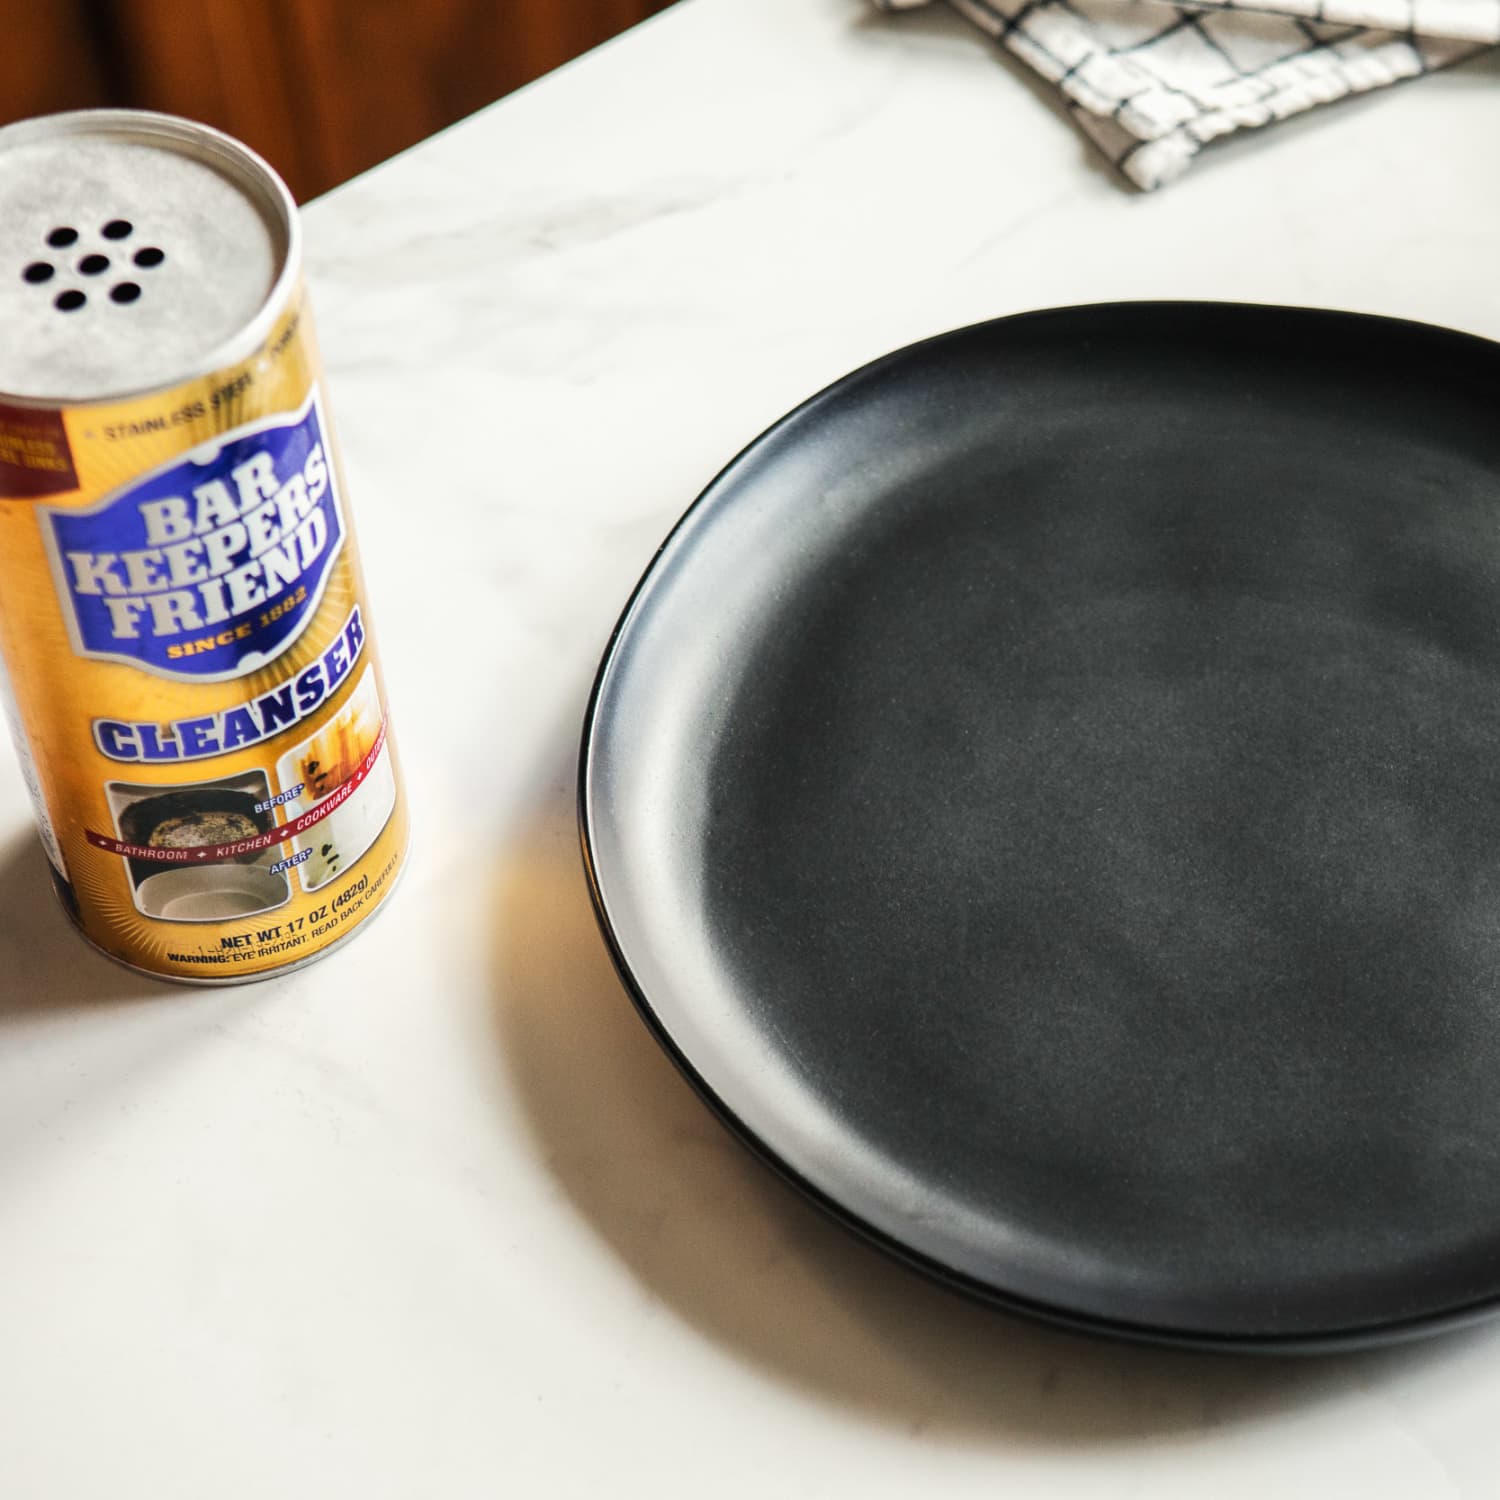 10 Things You Never Knew You Could Clean with Bar Keepers Friend